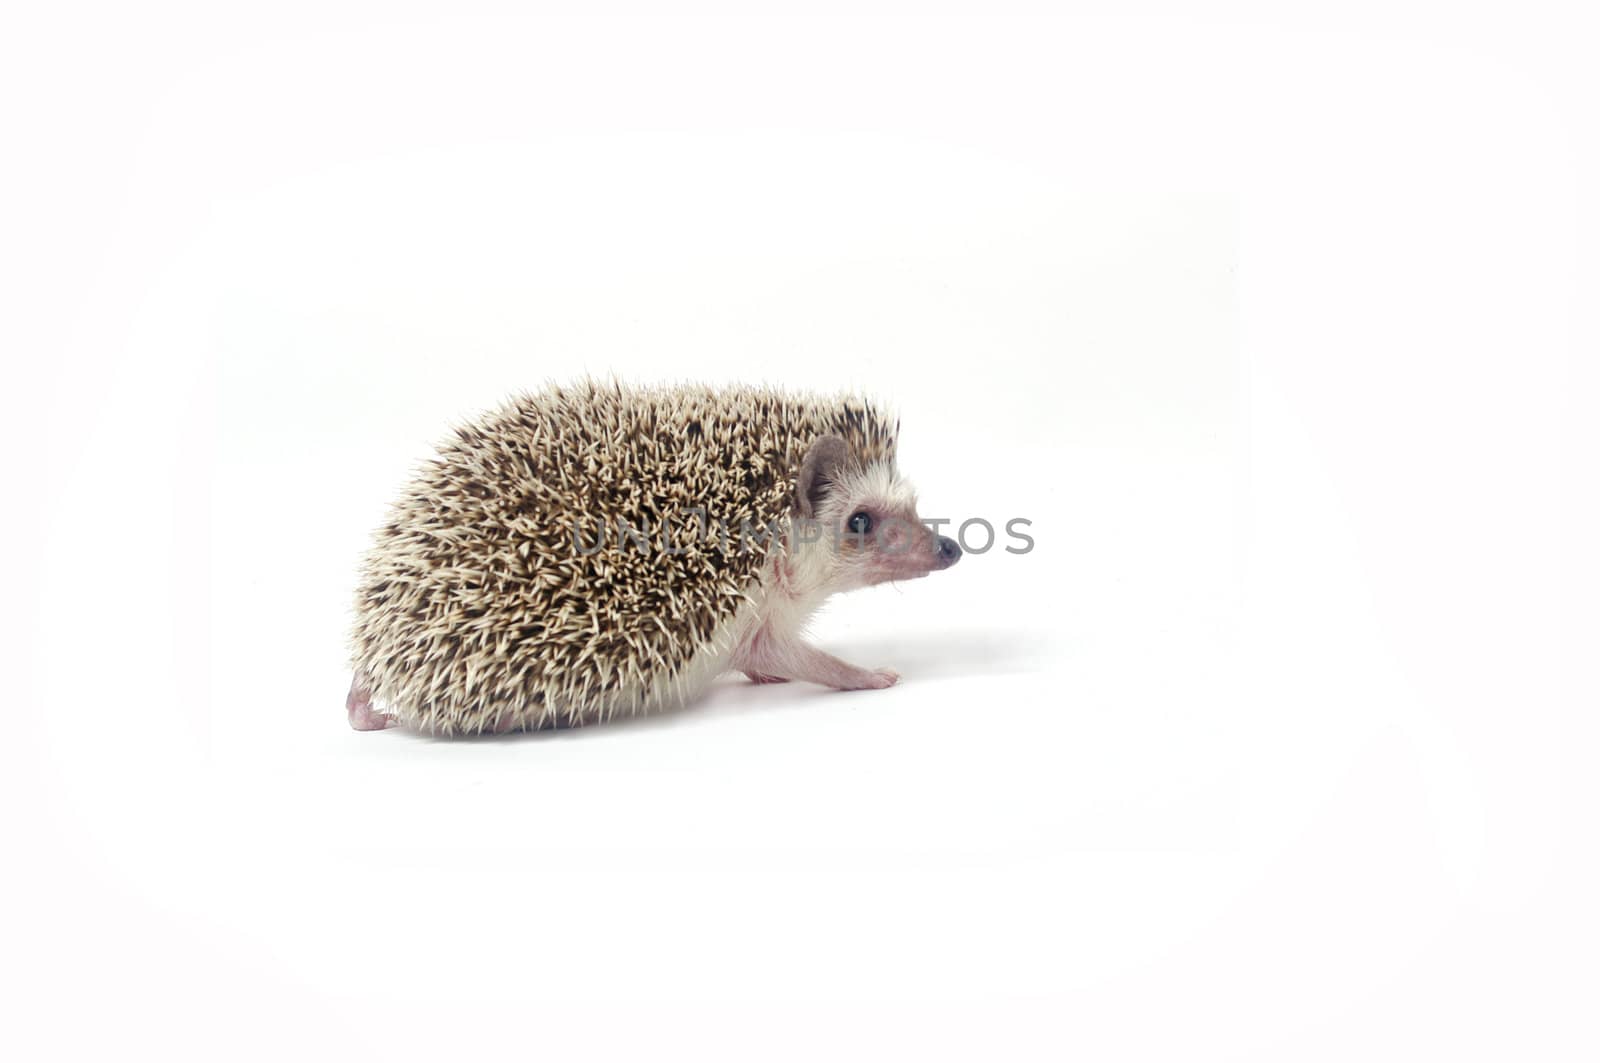 A closeup of a cute little hedgehog isolated on white